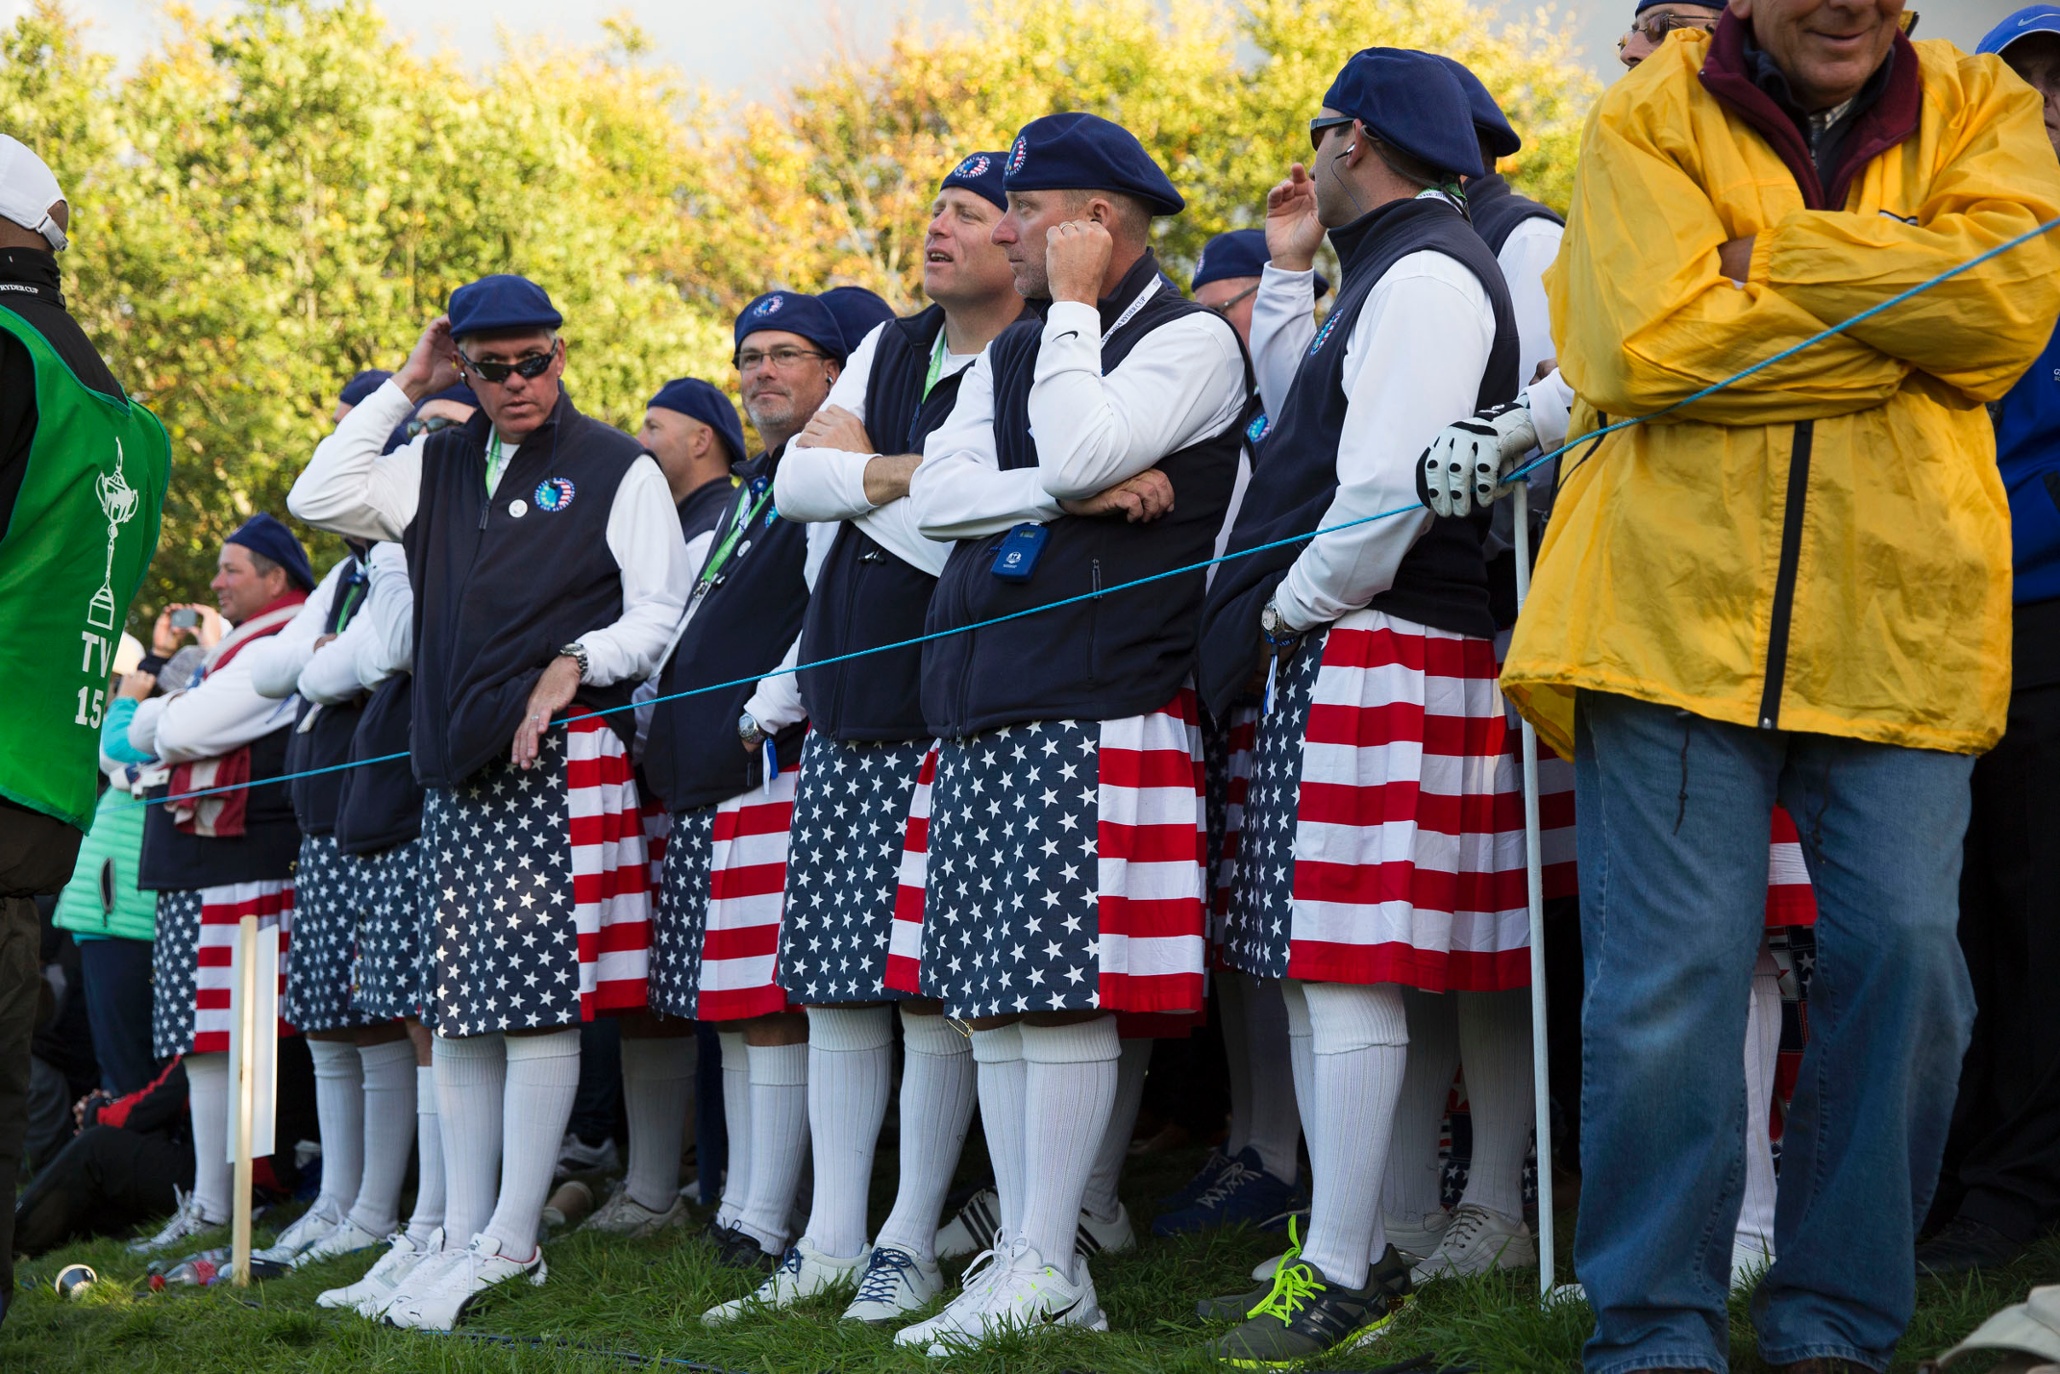 Ryder Cup 2014 fan outfits in pictures NewsPhoto news NewsLocker